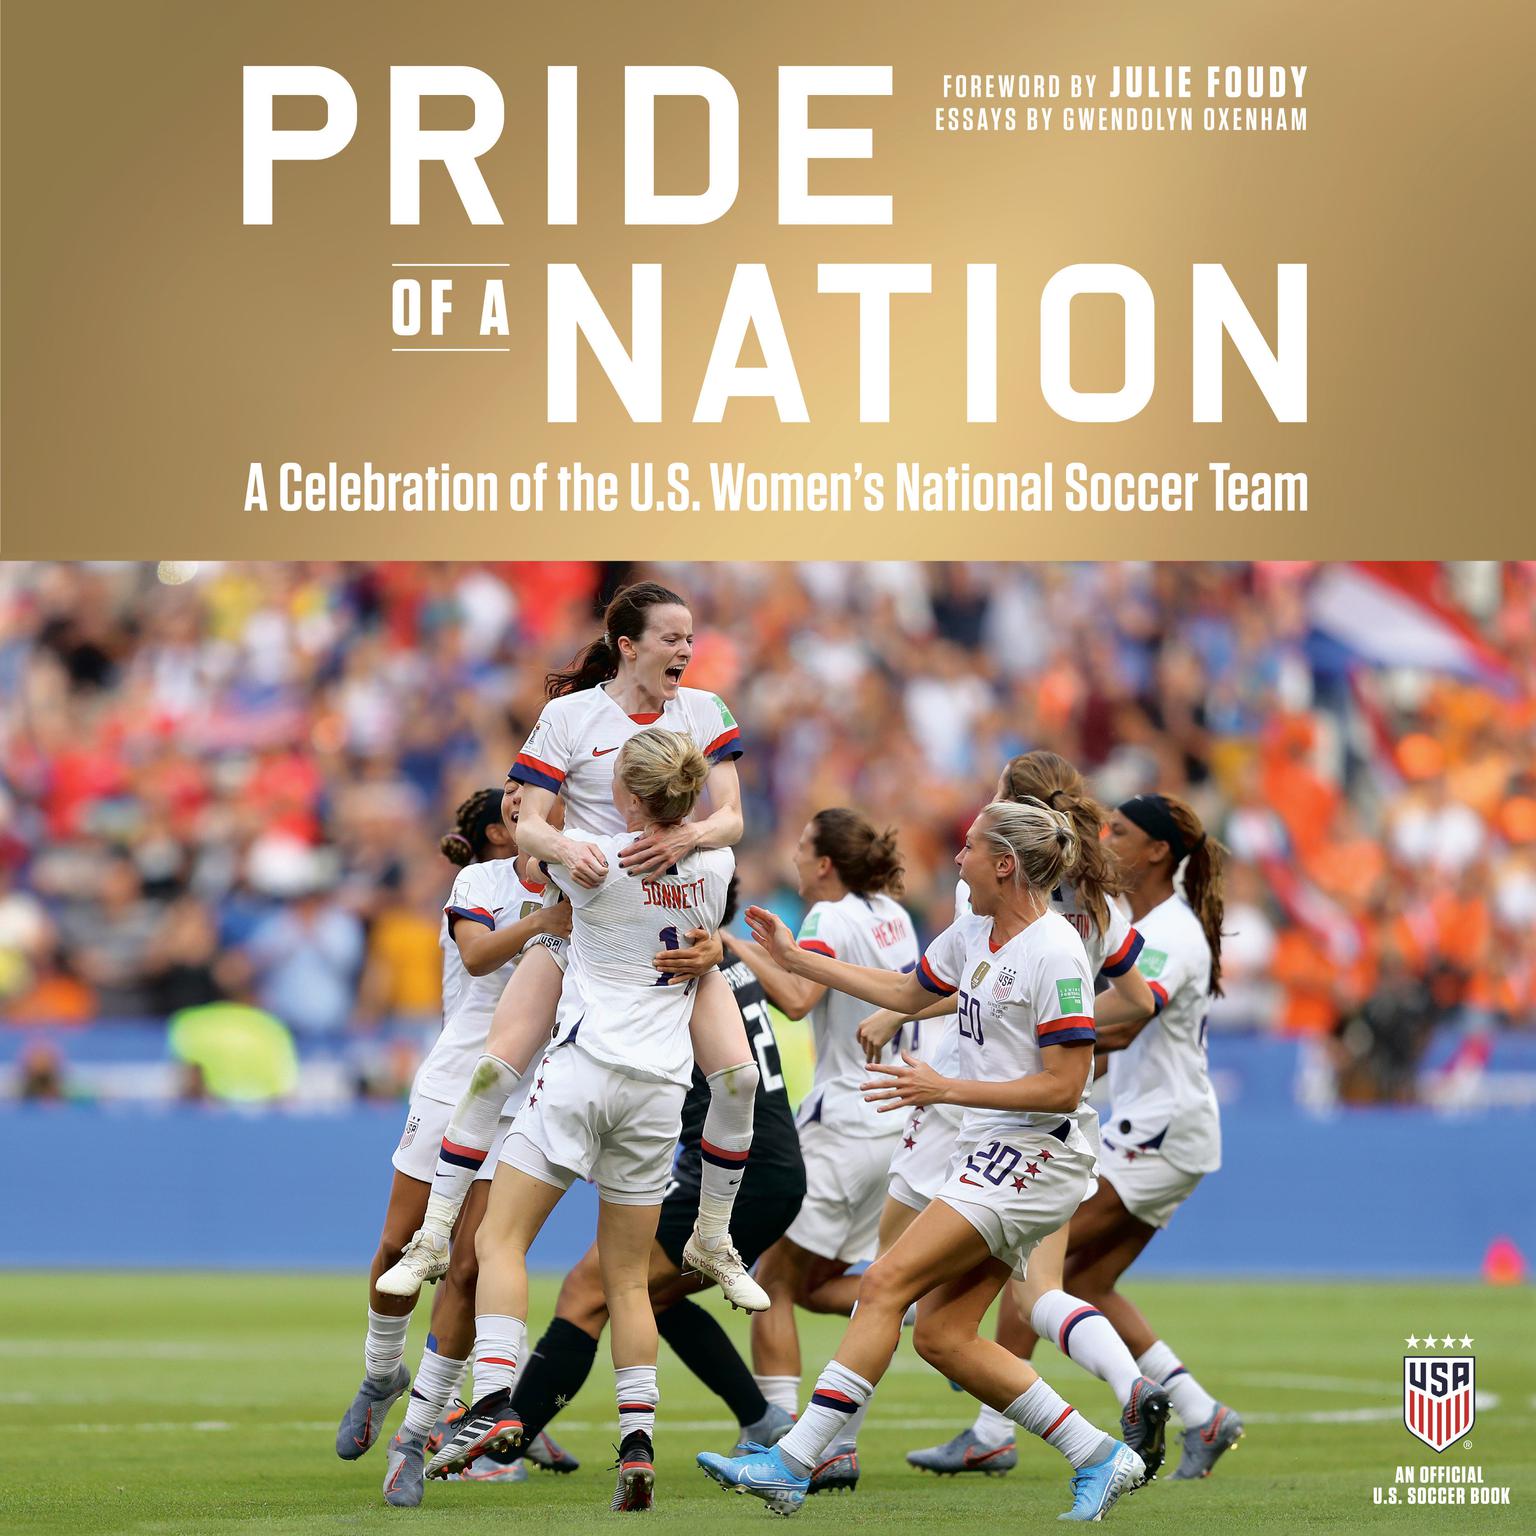 Pride of a Nation: A Celebration of the U.S. Womens National Soccer Team (An Official U.S. Soccer Book) Audiobook, by Gwendolyn Oxenham